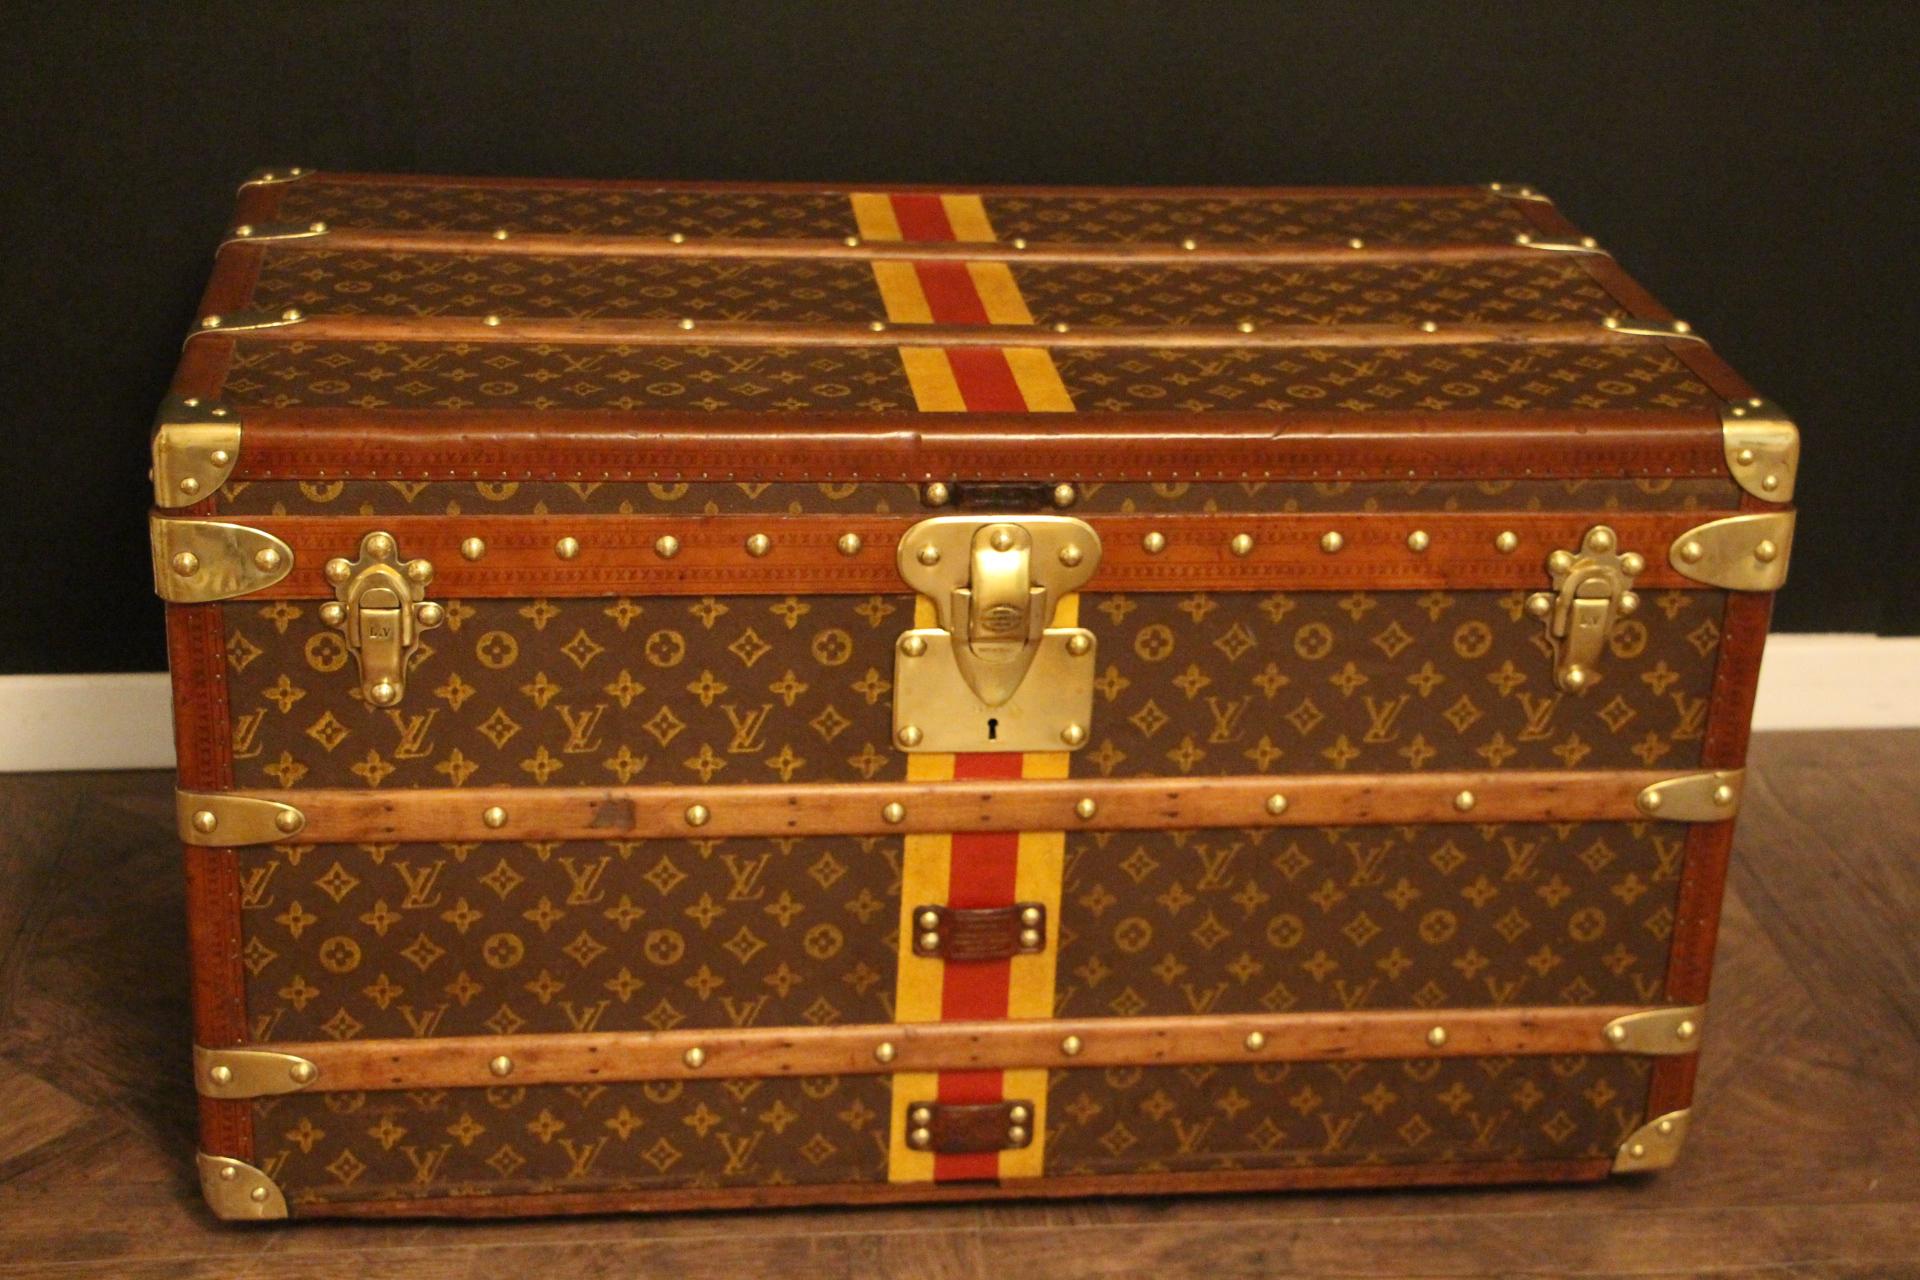 This superb Louis Vuitton steamer trunk features stenciled monogram canvas, honey color lozine trim, LV stamped solid brass locks, latches and studs as well as leather side handles and brass corners. Its customized painted yellow and red stripes add